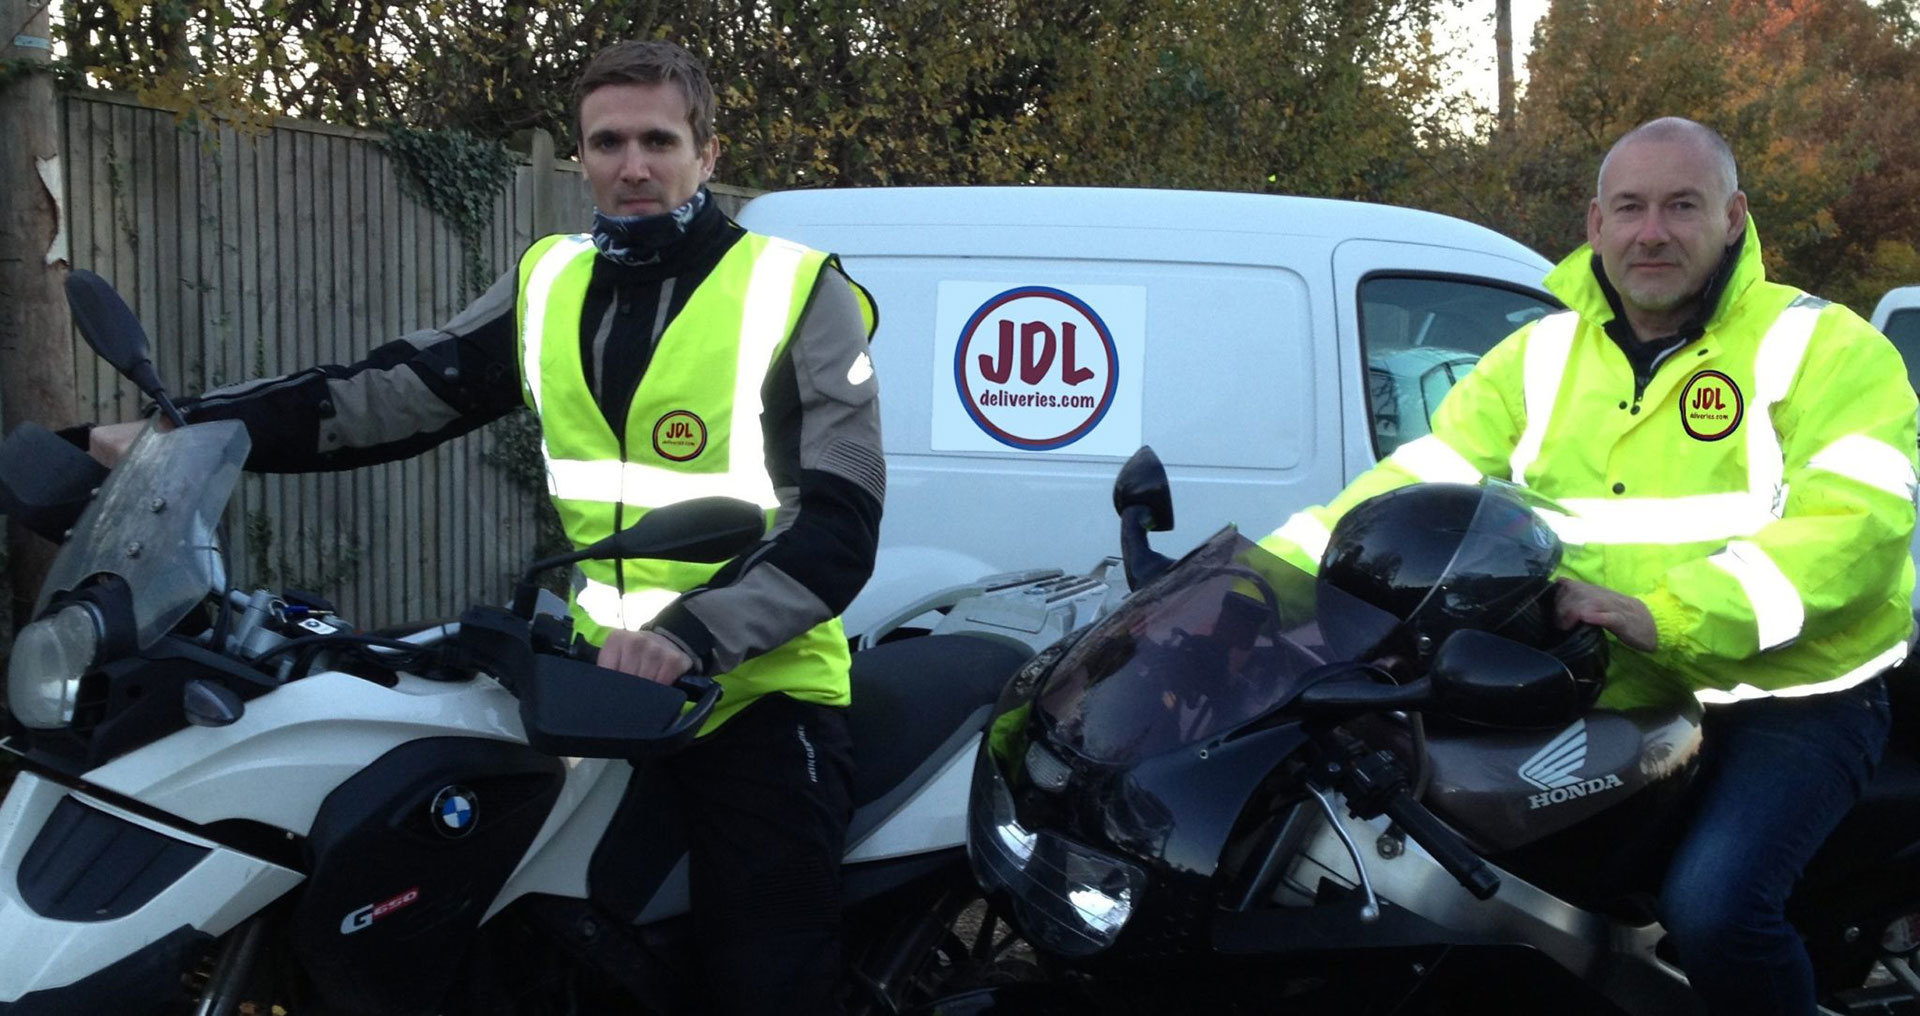 JDL Deliveries Motorcycle Couriers